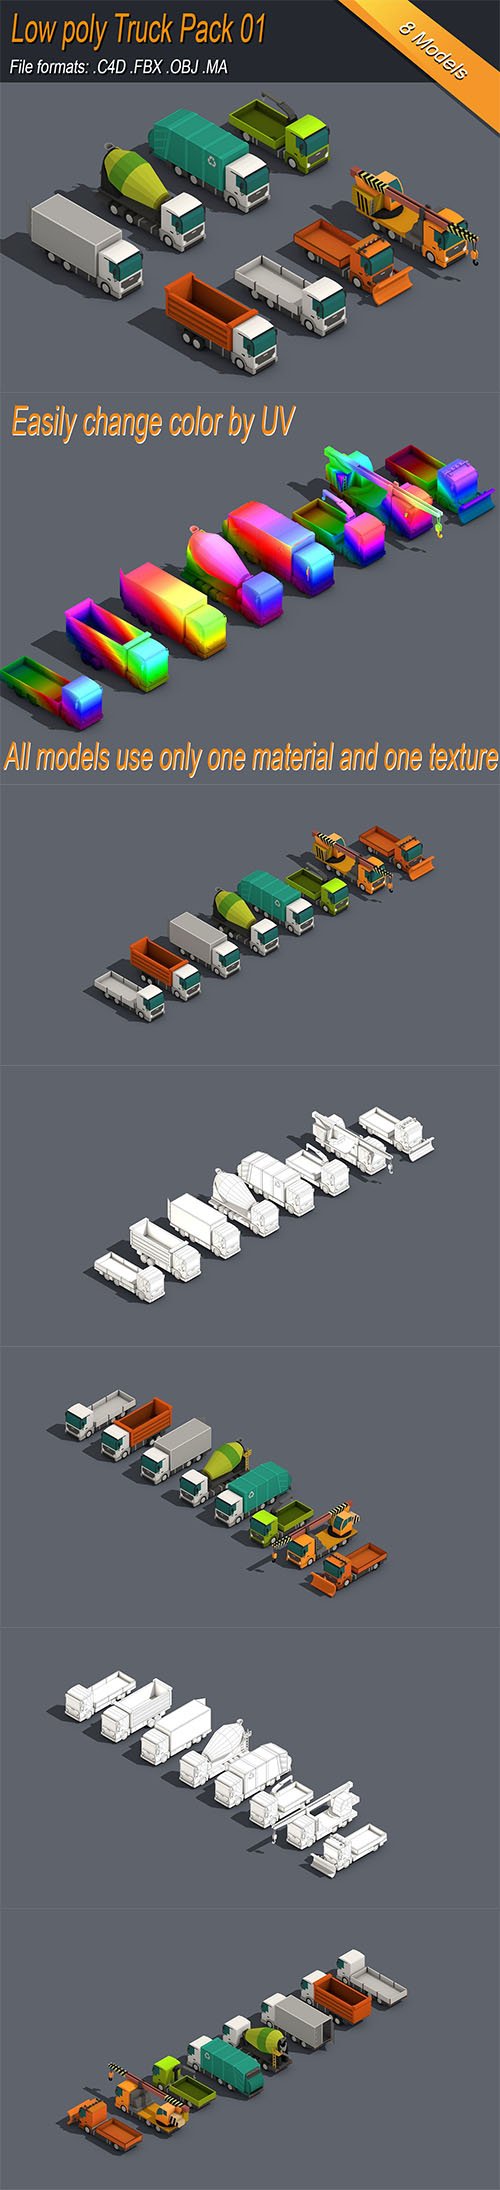 Low Poly Truck Pack 01 Isometric Low-poly 3D model